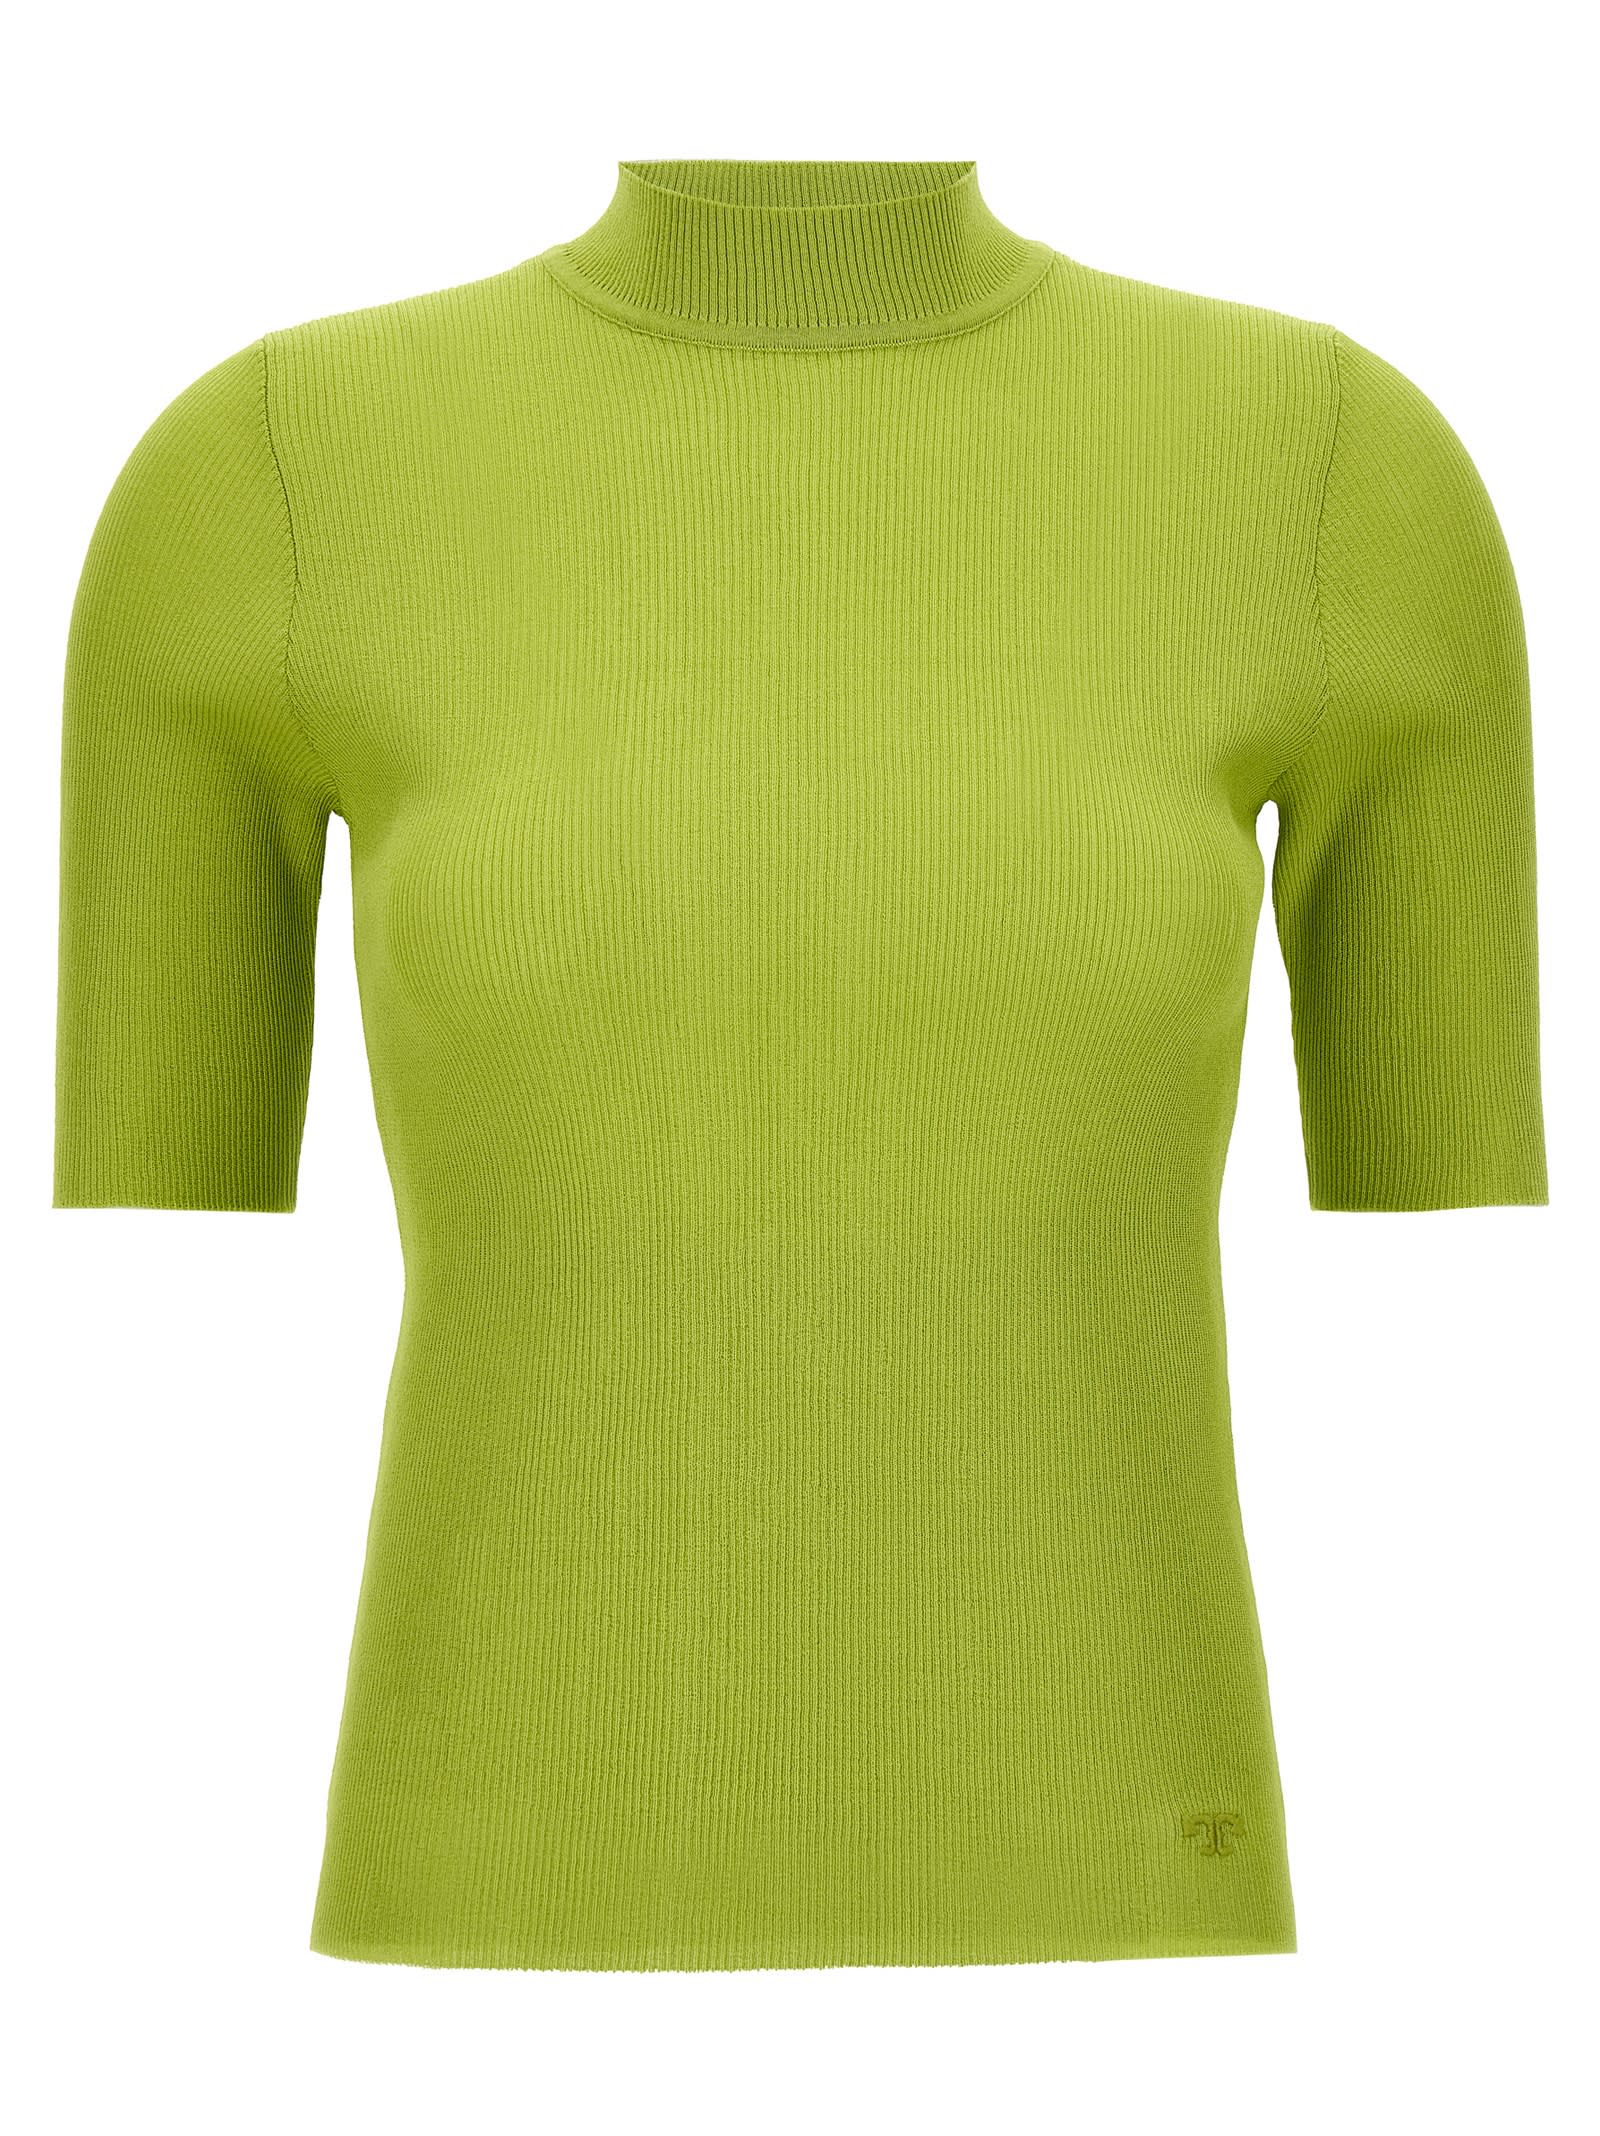 TORY BURCH RIBBED SWEATER